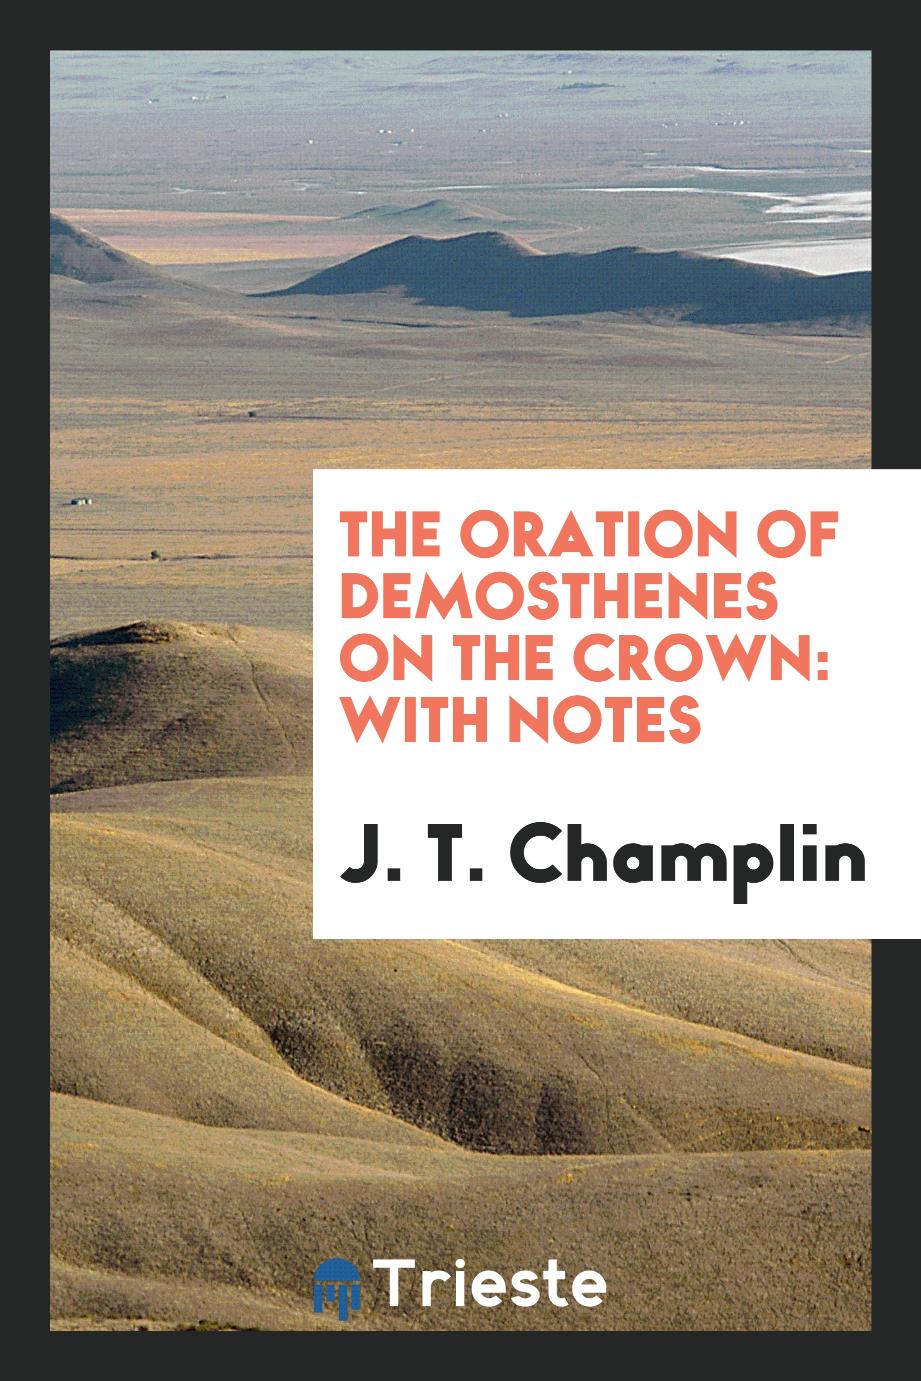 J. T. Champlin - The oration of Demosthenes on the crown: with notes